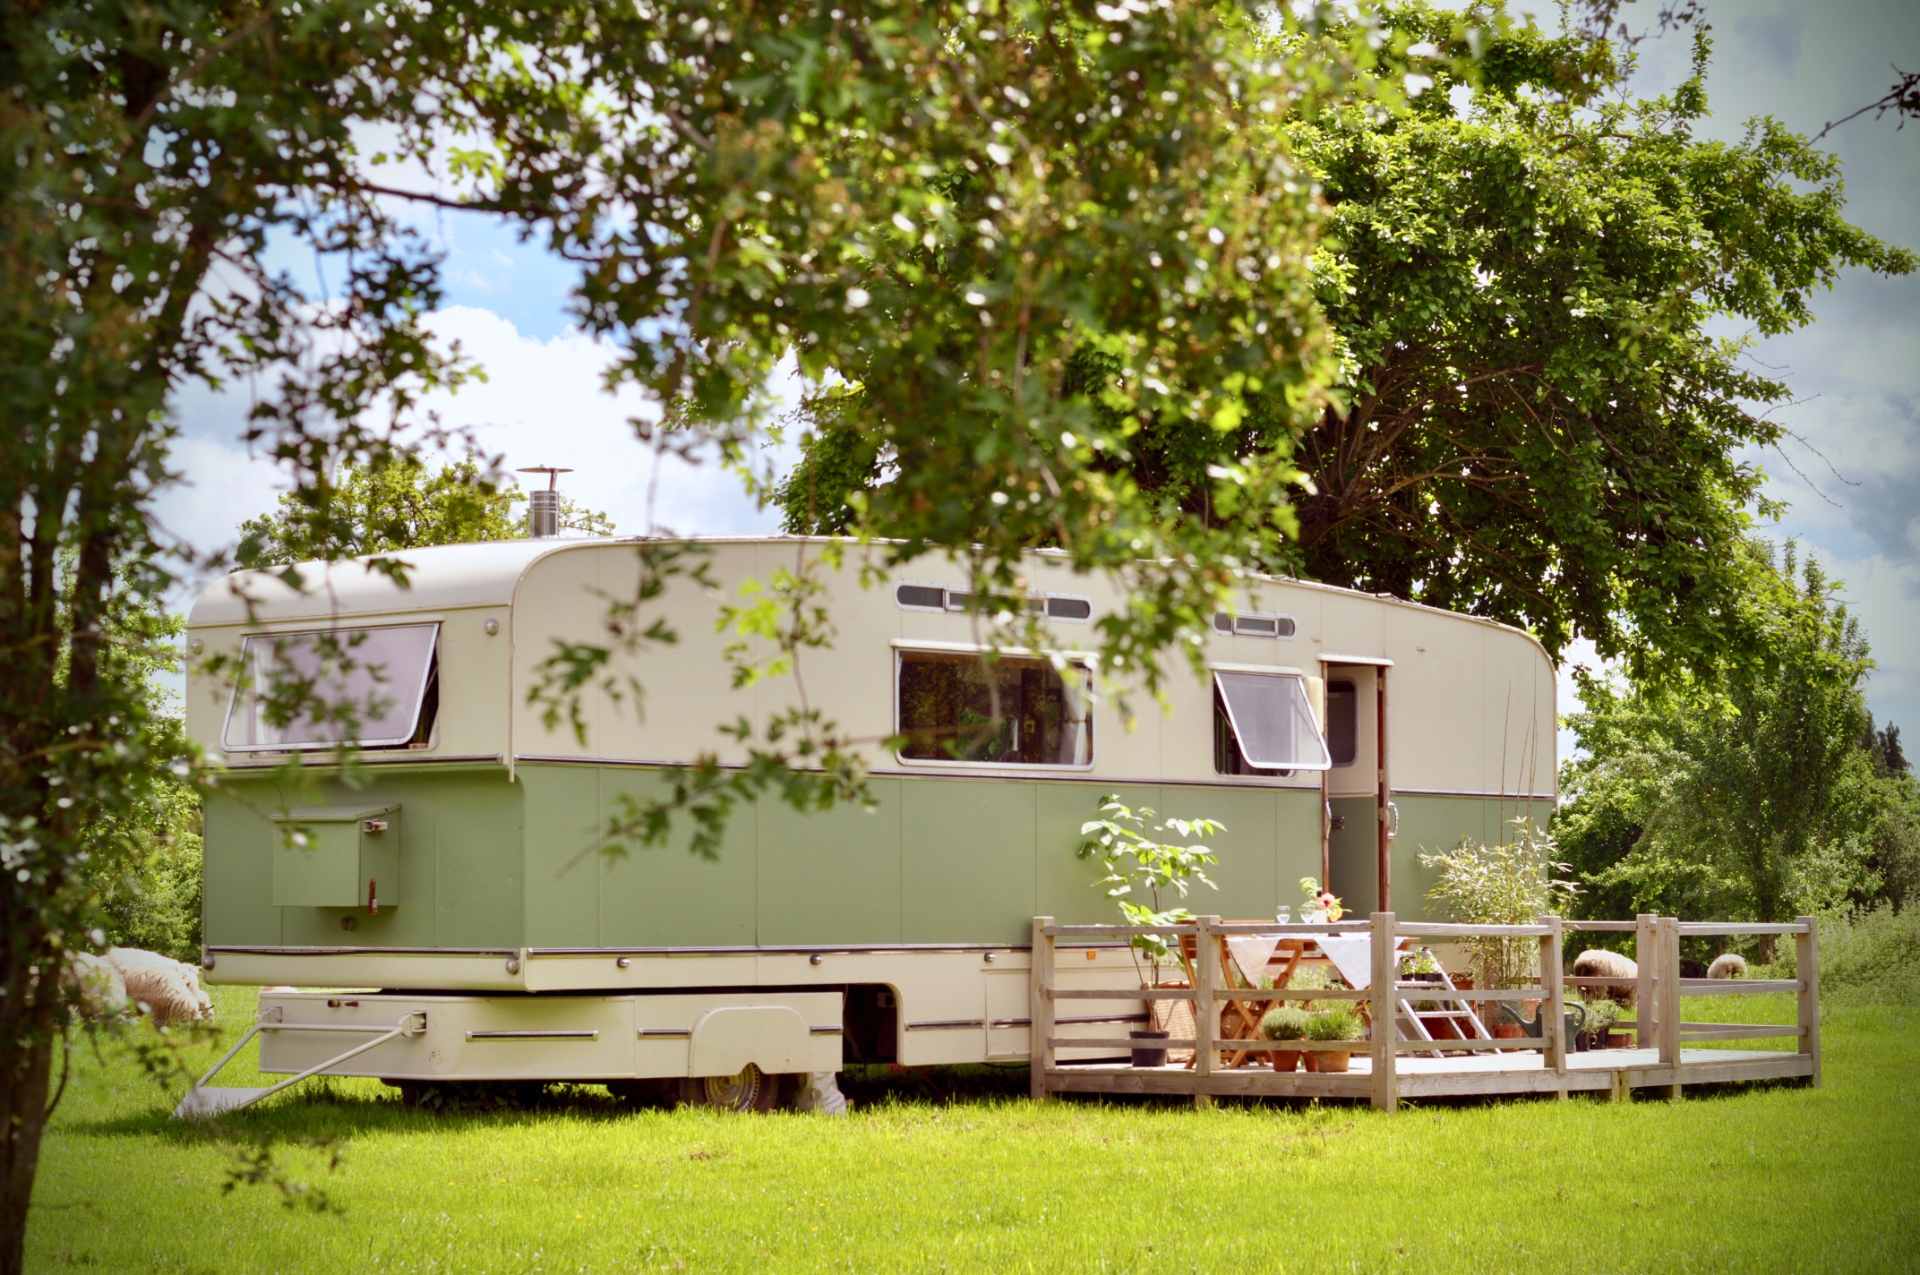 green-and-white-sipson-caravan-with-decking-in-field-on-sunny-day